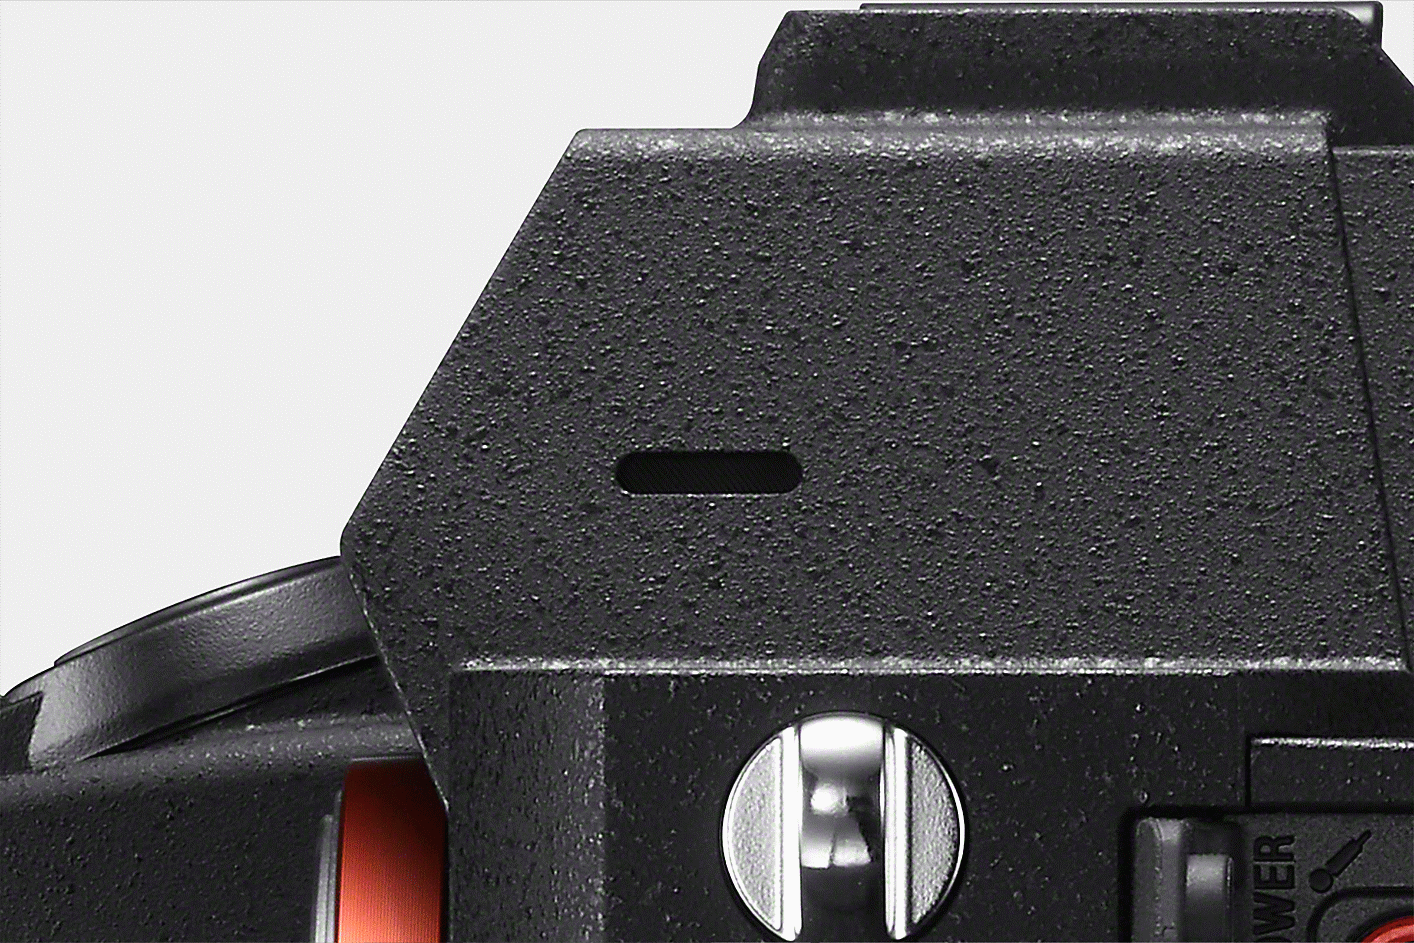 A close-up of the camera's internal microphone